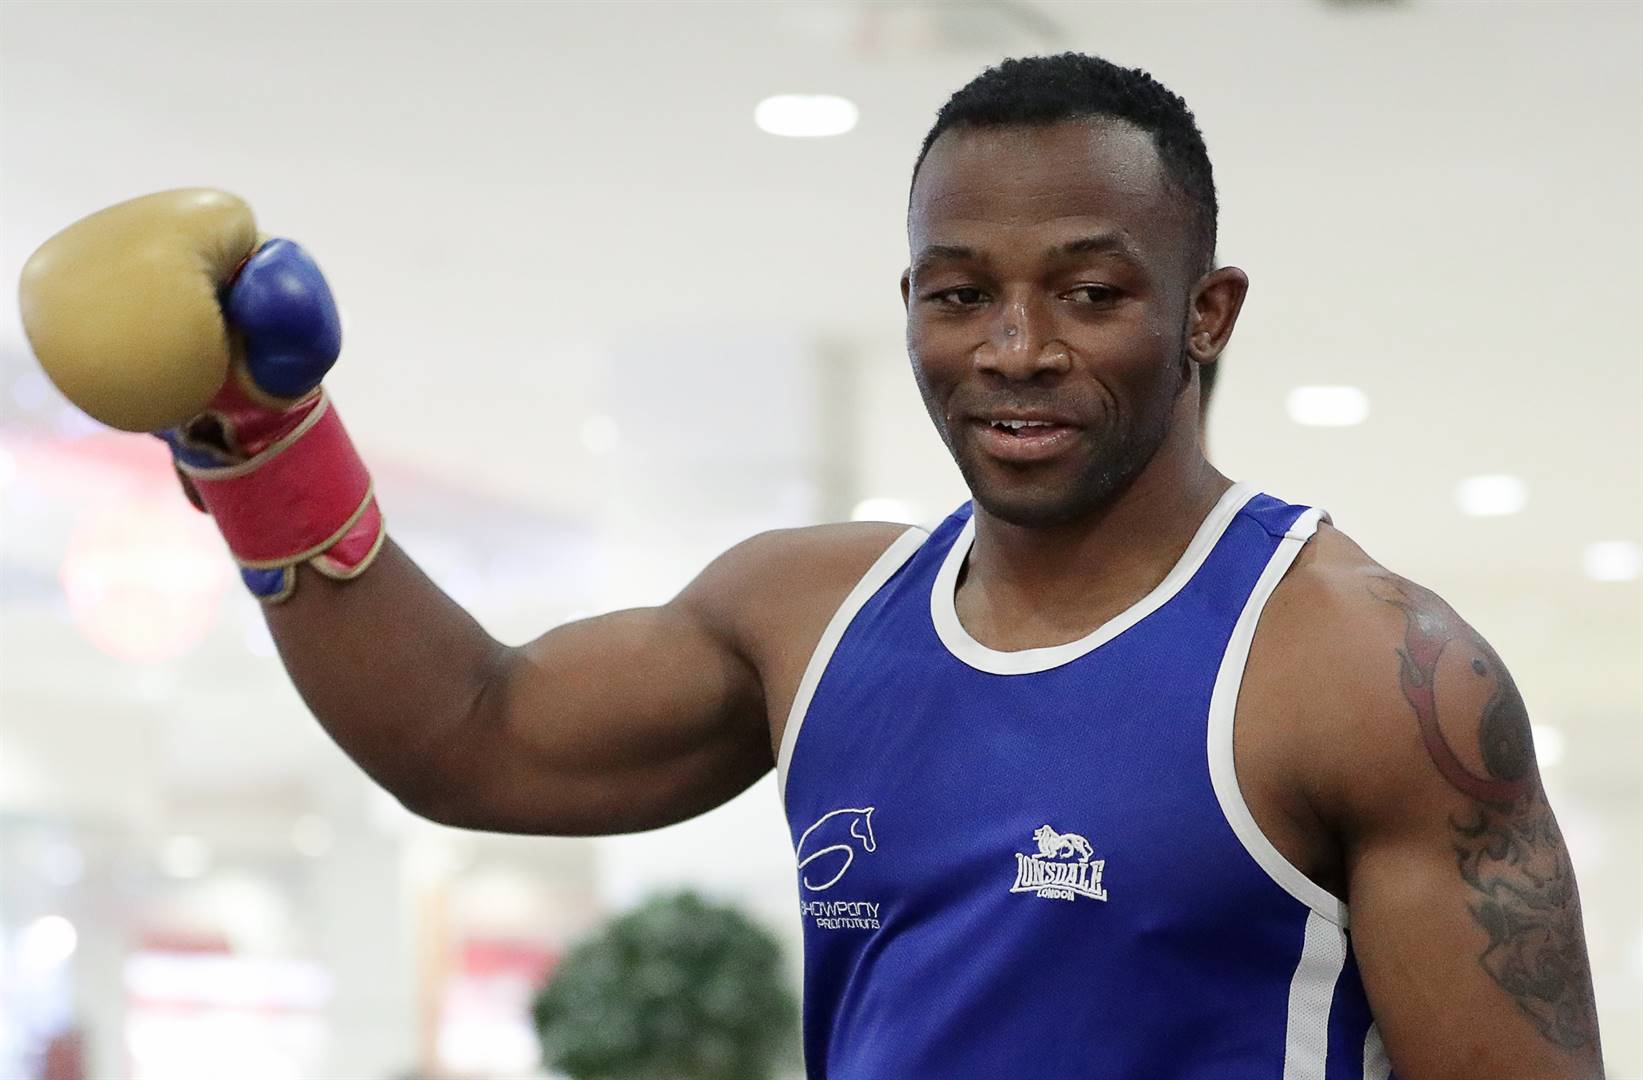 Thabiso Mchunu last laced his gloves when he fell short on his WBC cruiserweight title challenge against Ilunga Makabu via a split decision in the US in January 2022.